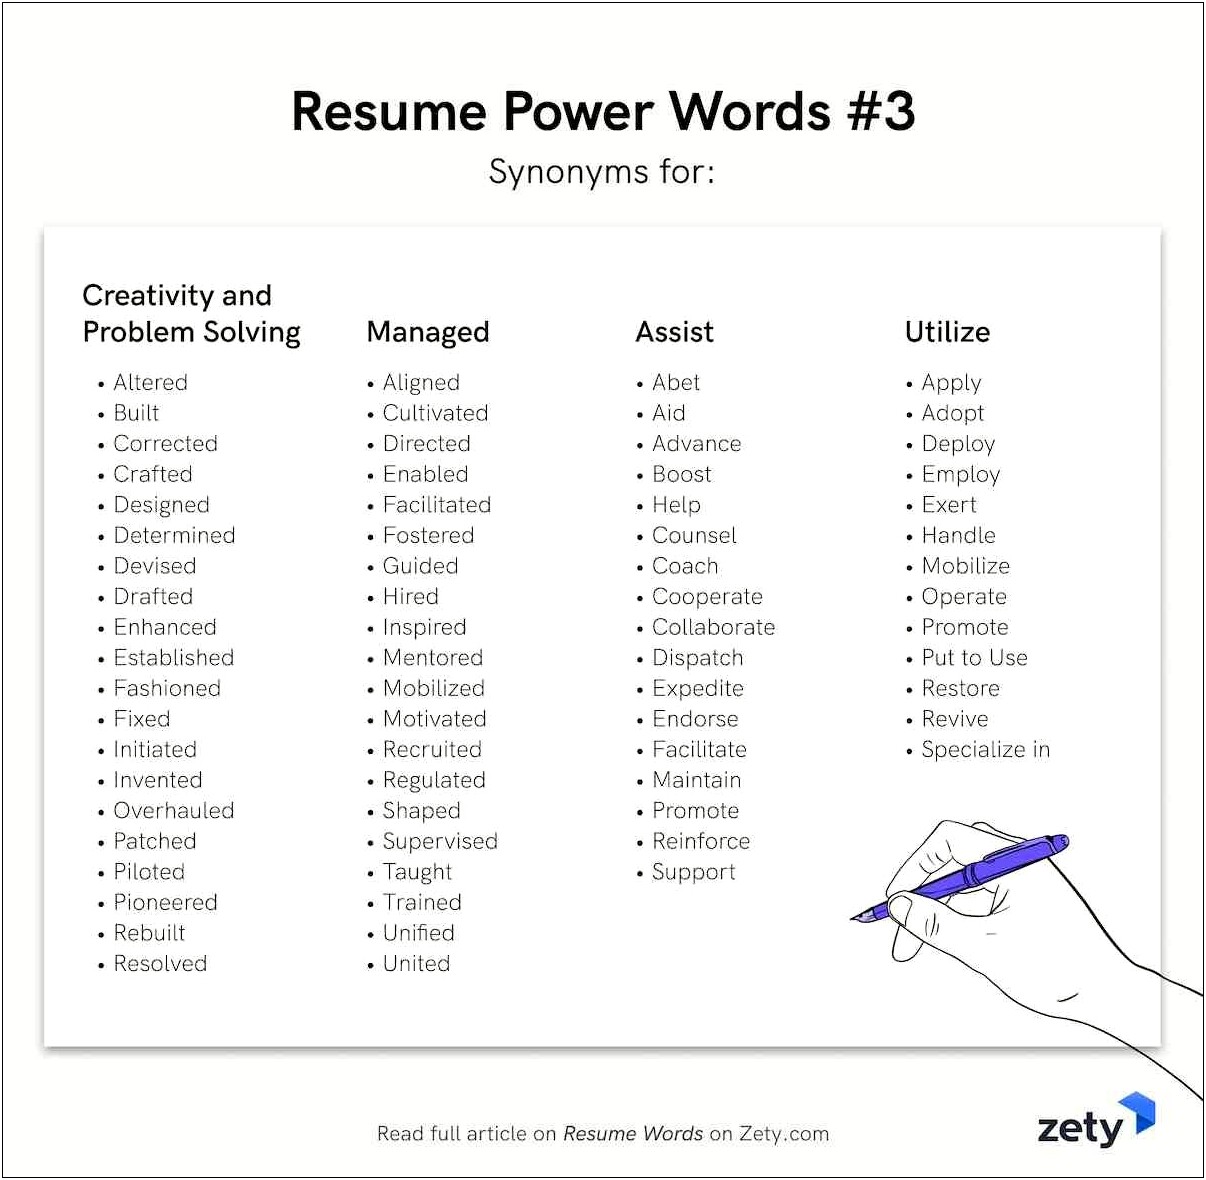 10 Words To Describe Yourself On A Resume